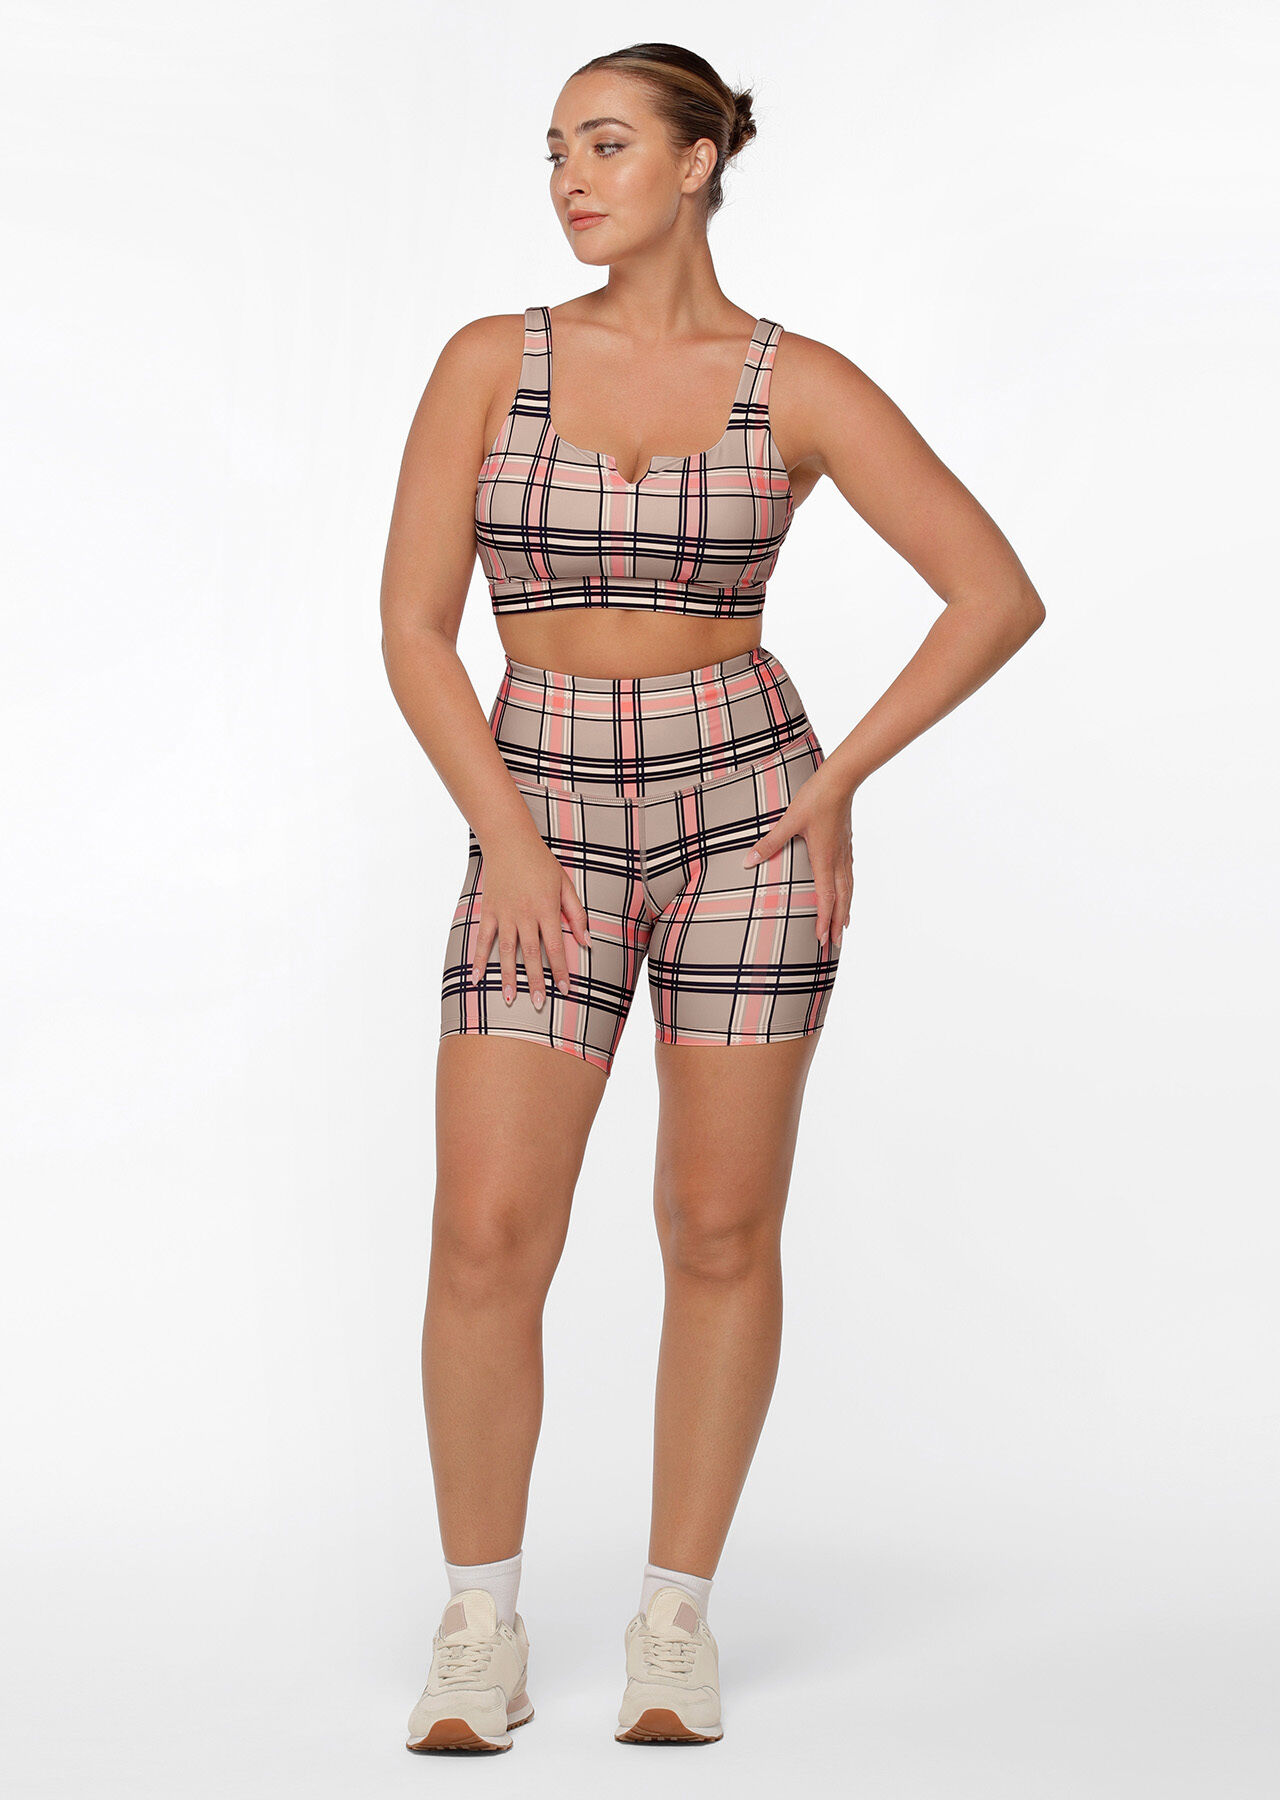 New Arrivals | Activewear clothing | Lorna Jane USA